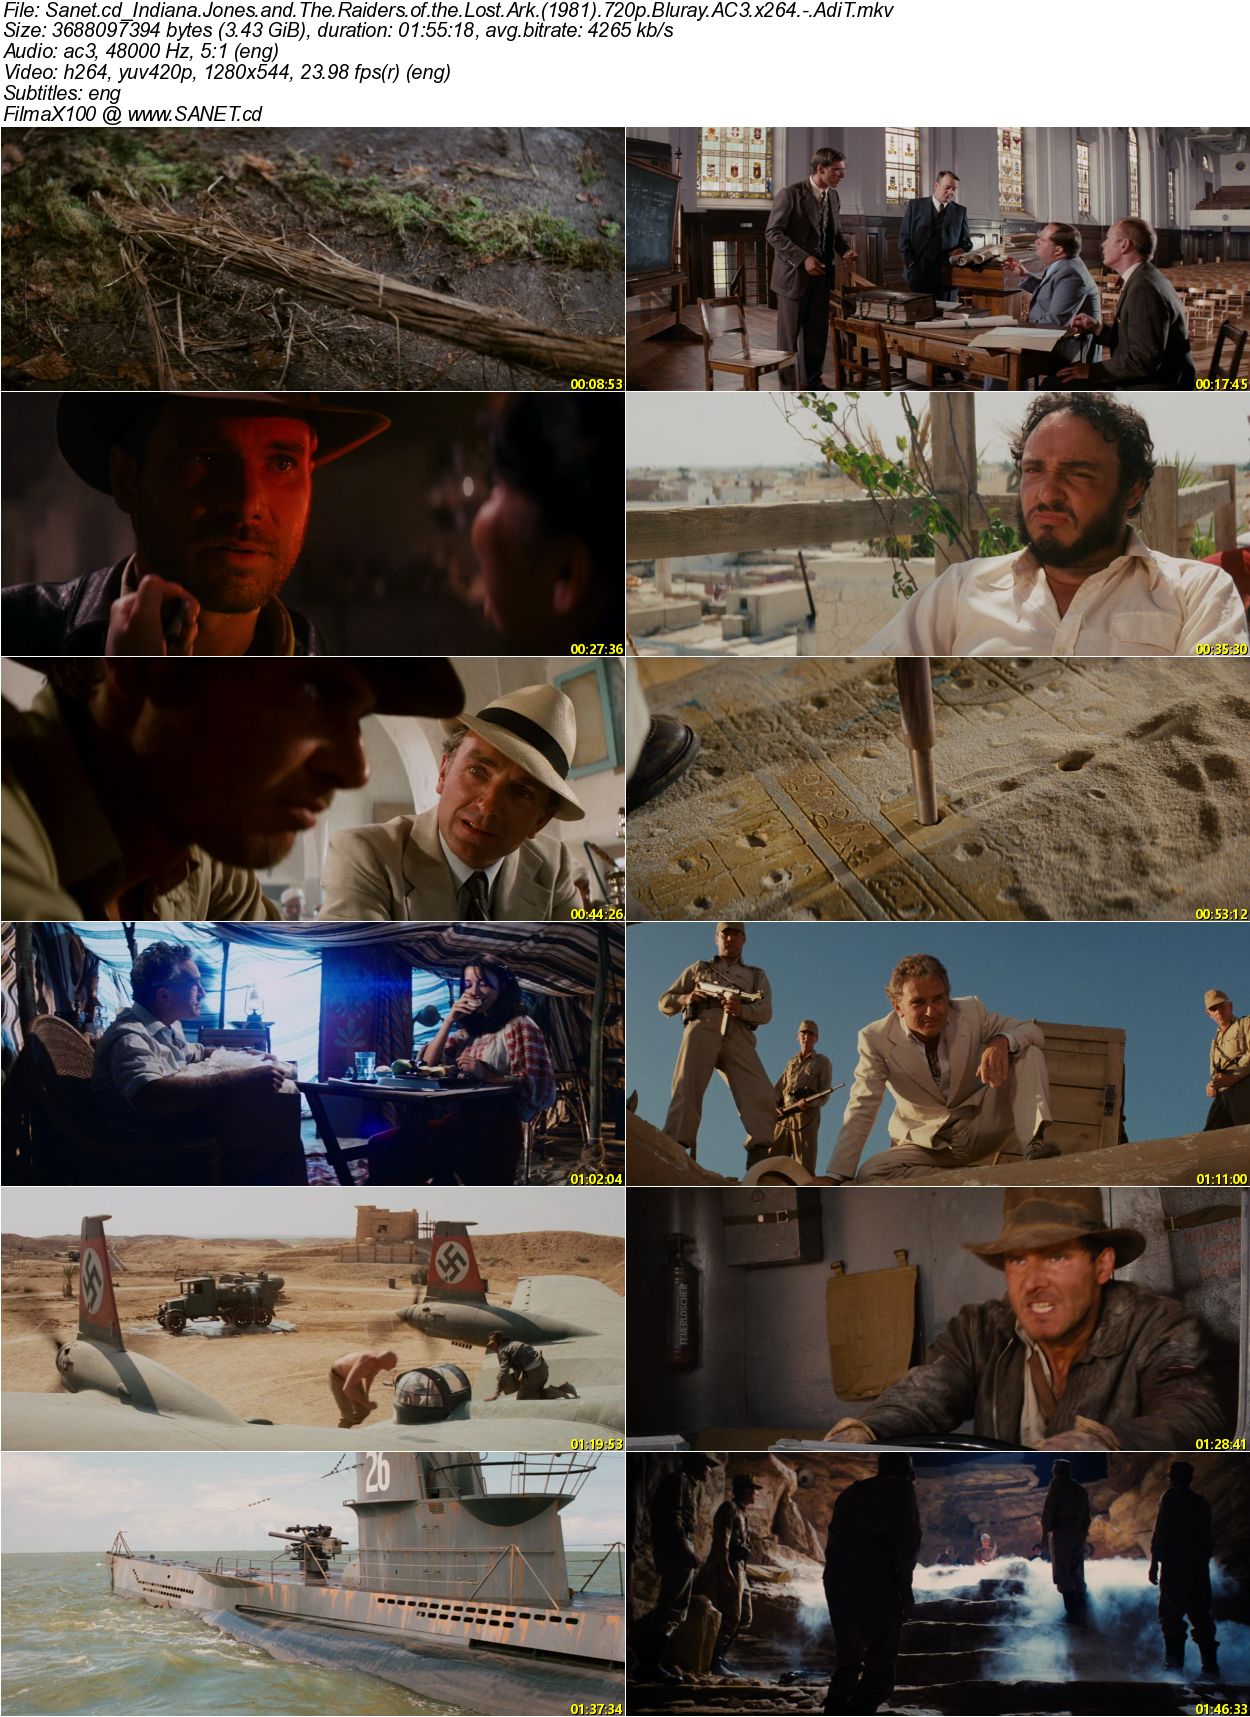 Watch Raiders of the Lost Ark 1981 Full HD 1080p Online